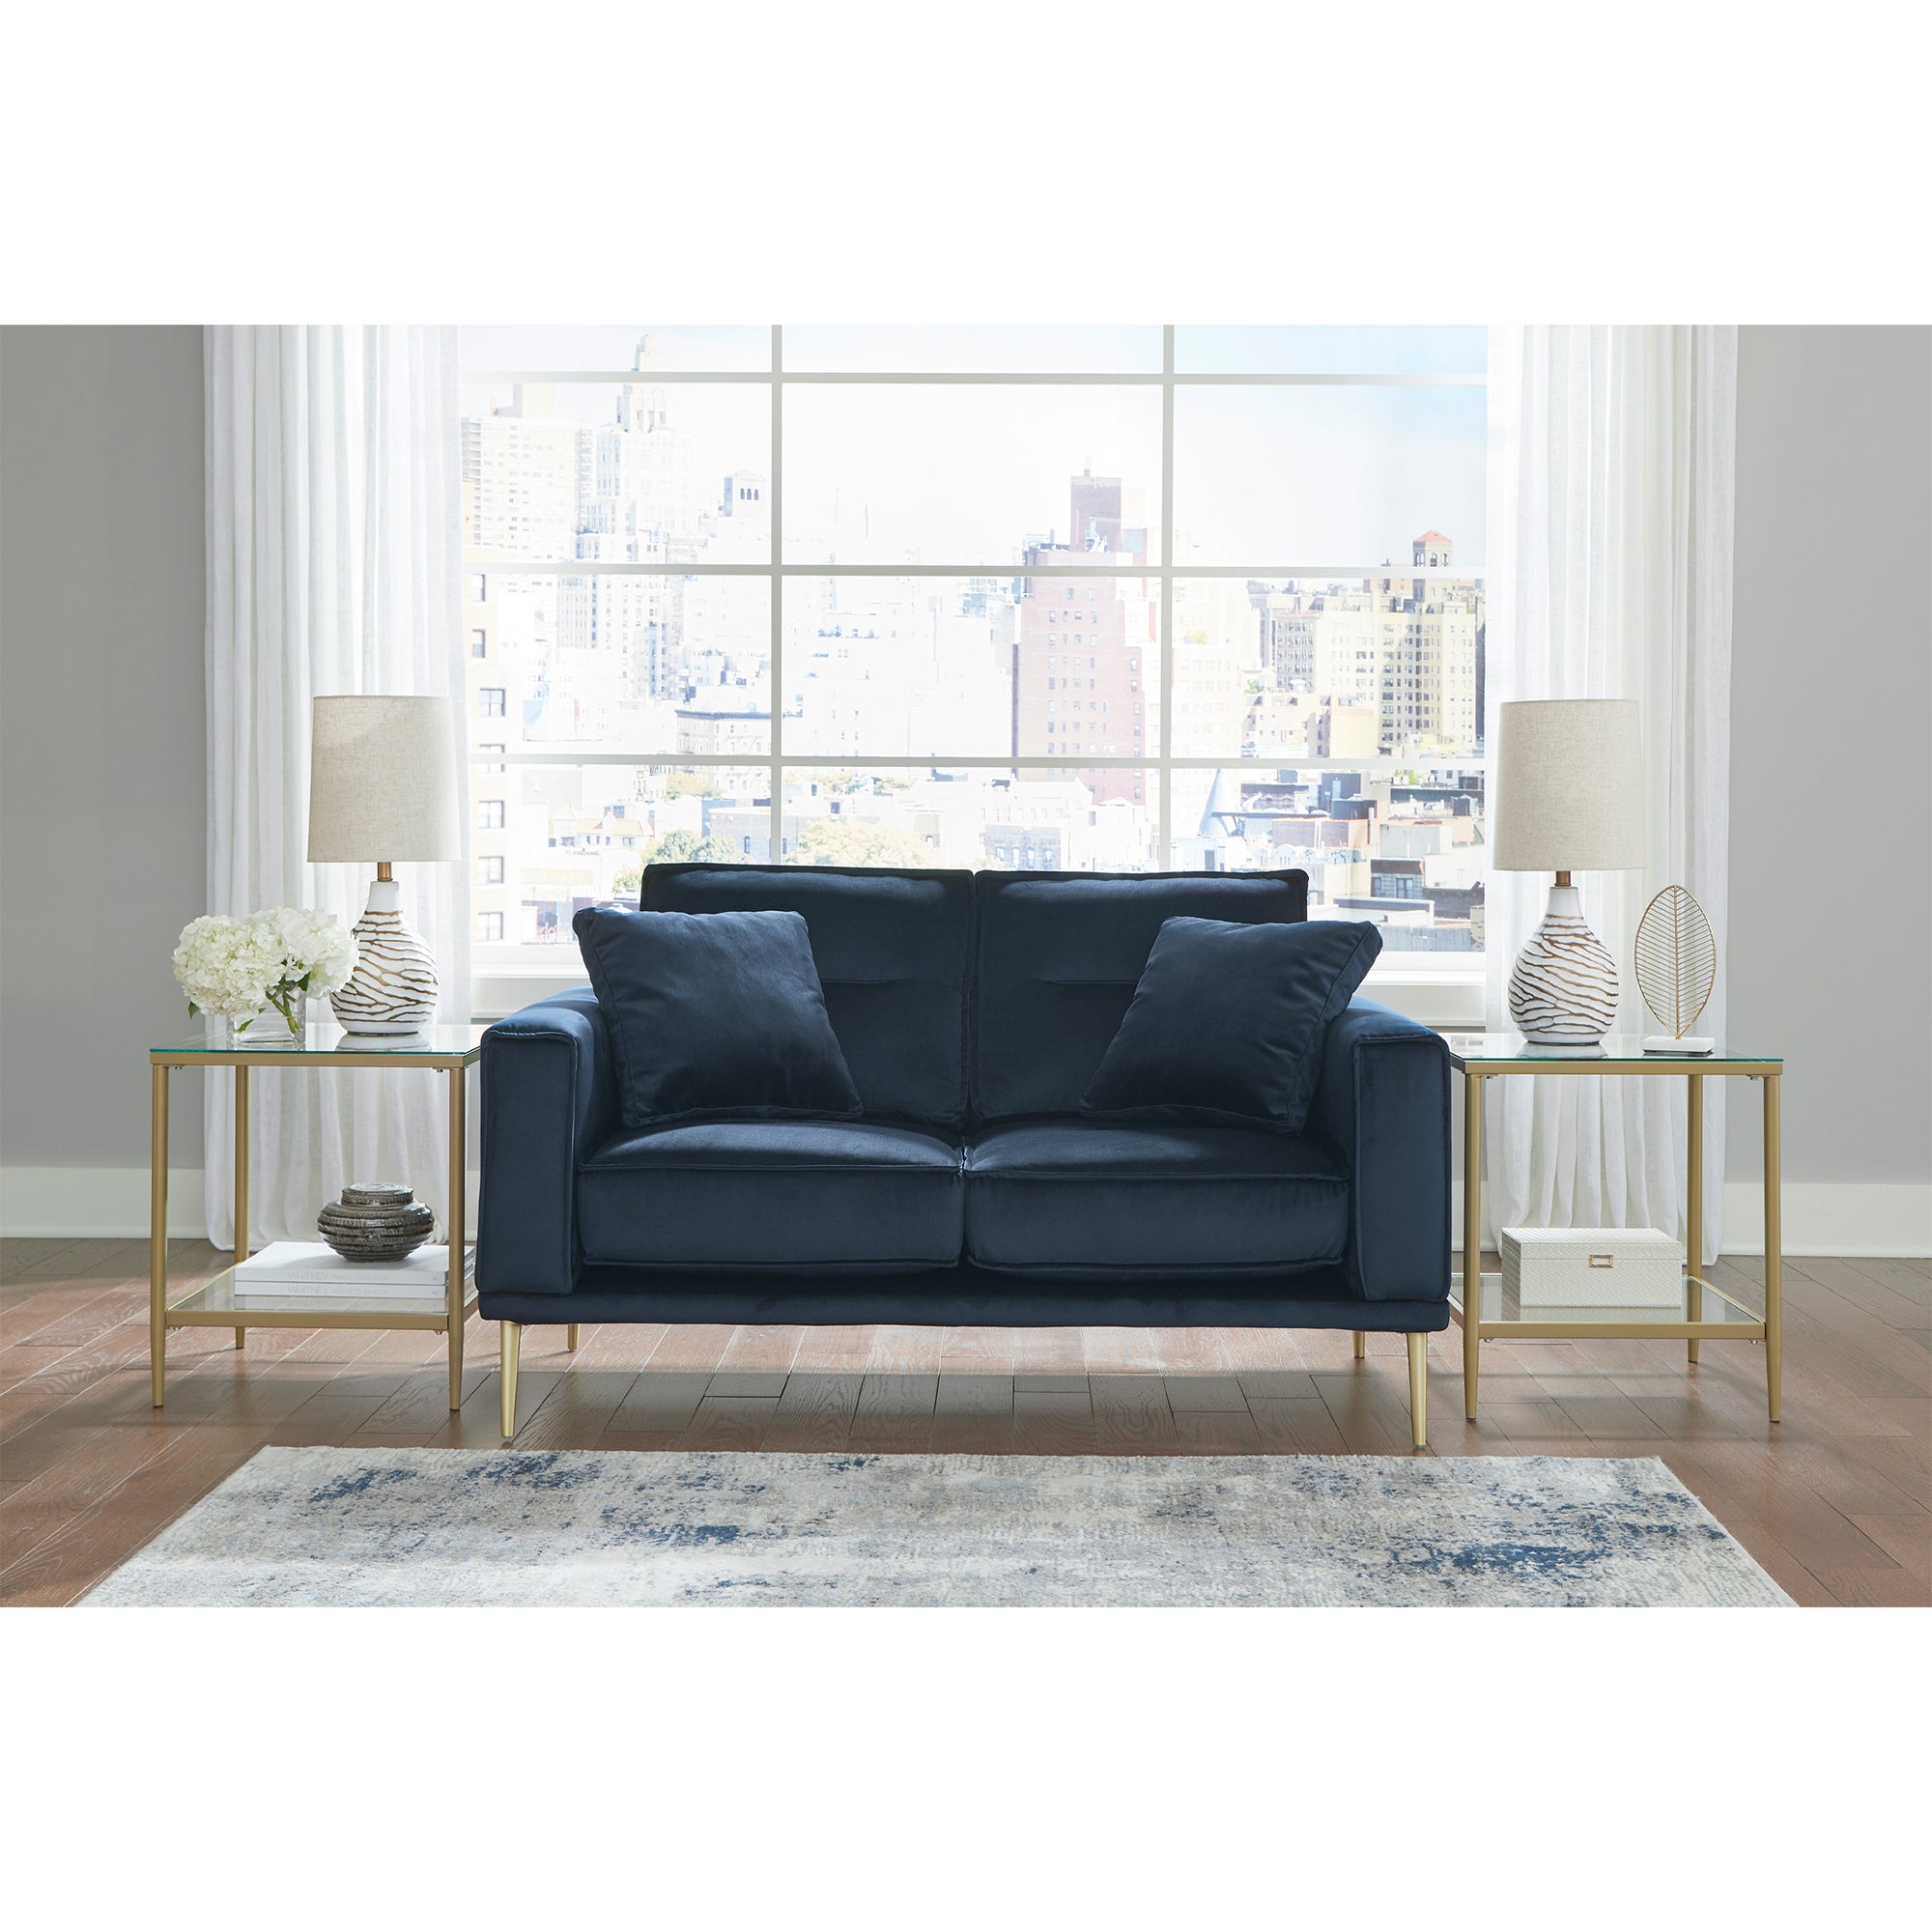 Macleary Loveseat in Navy Color